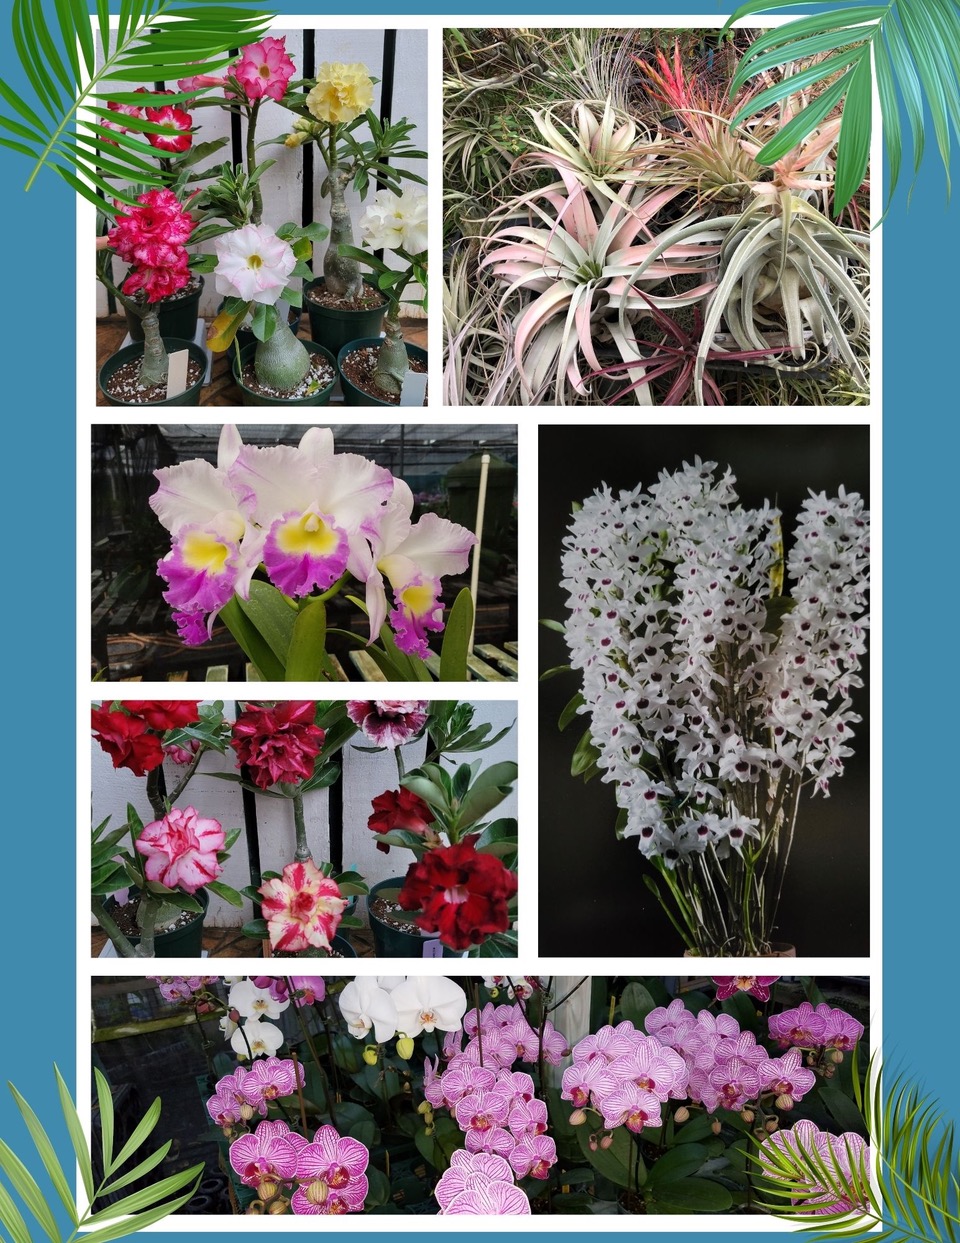 Orchids and other plants for sale at HOS Show